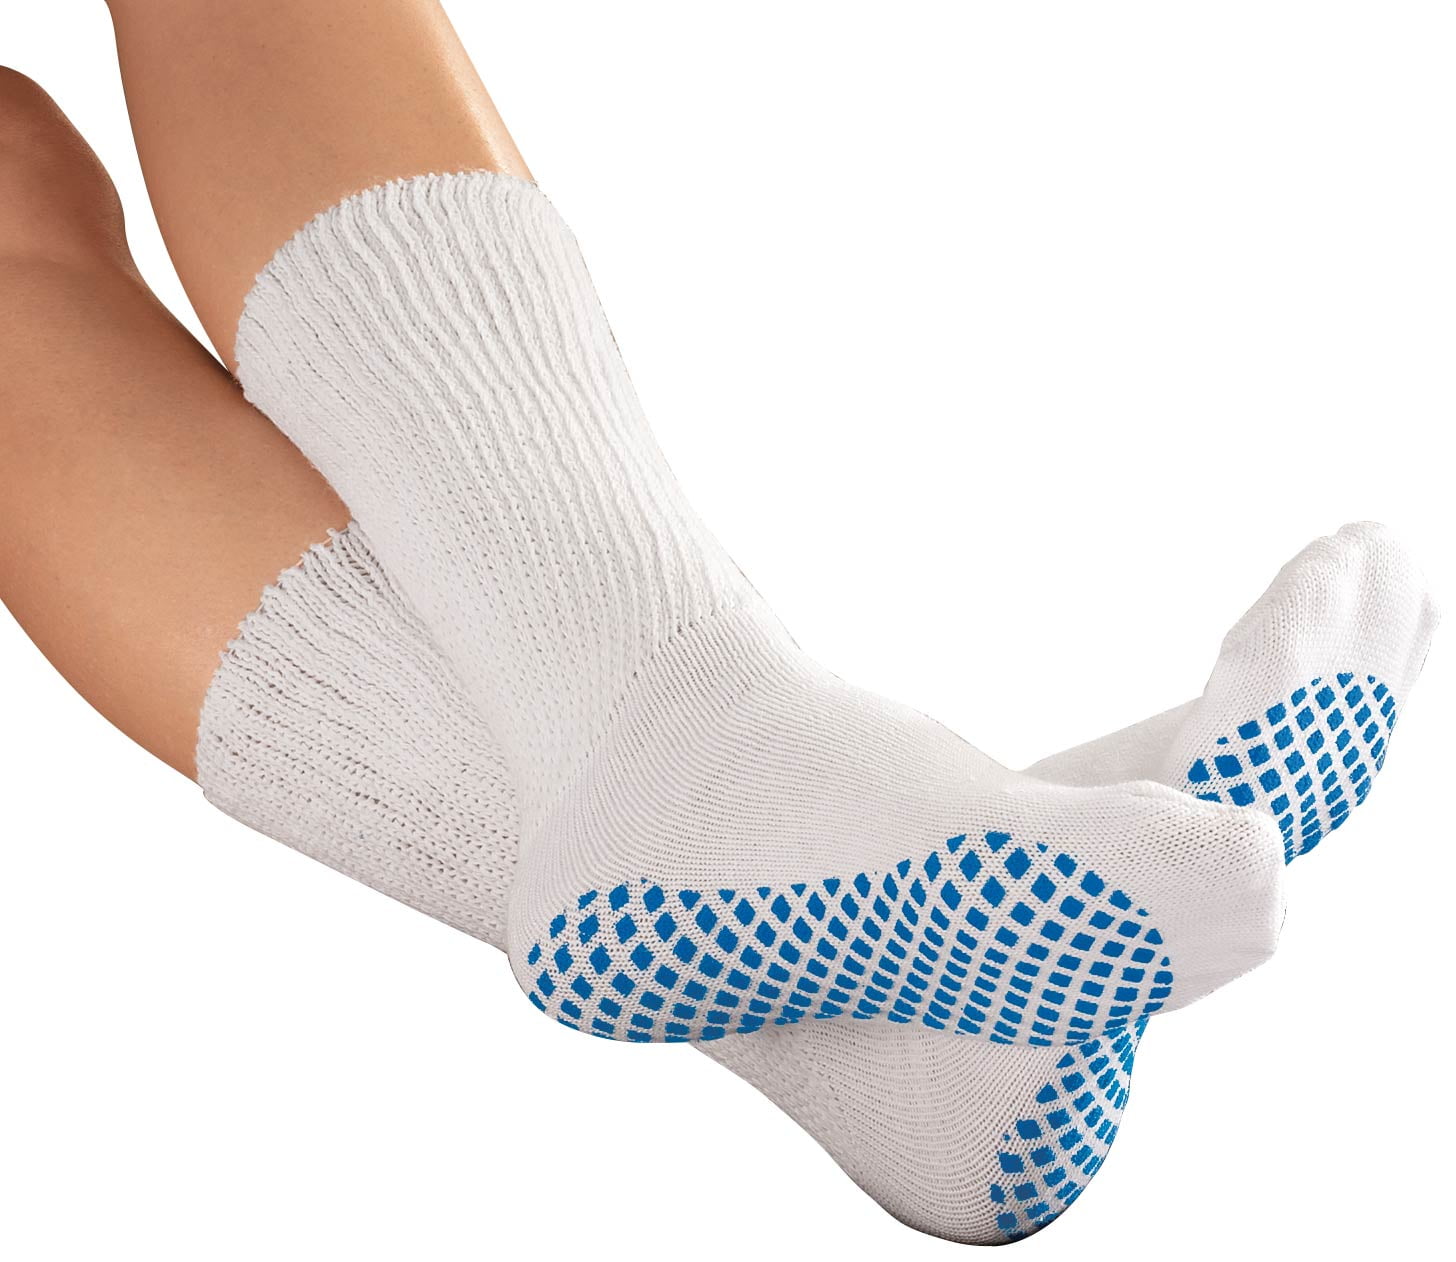 Wholesale gripper slipper socks To Compliment Any Outfit Or Be